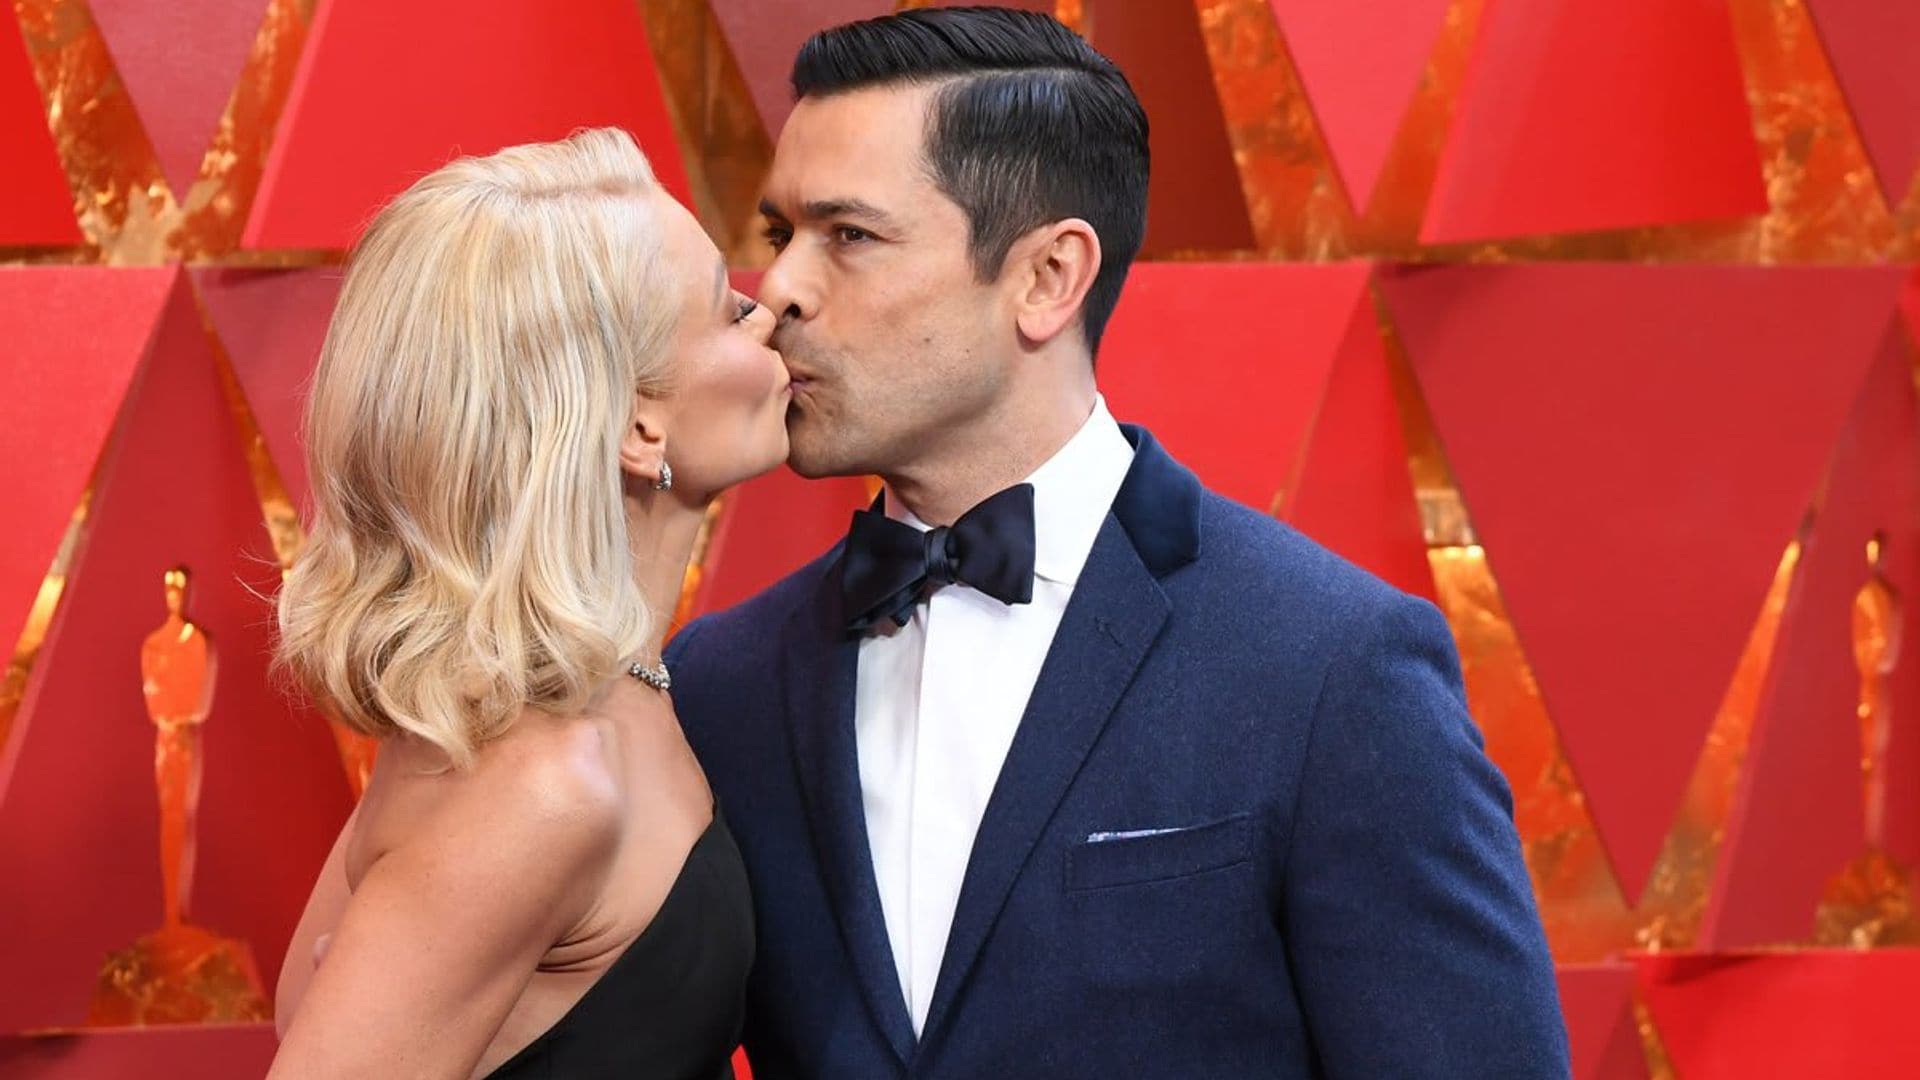 Kelly Ripa and Mark Consuelos revealed the secret to their happy marriage